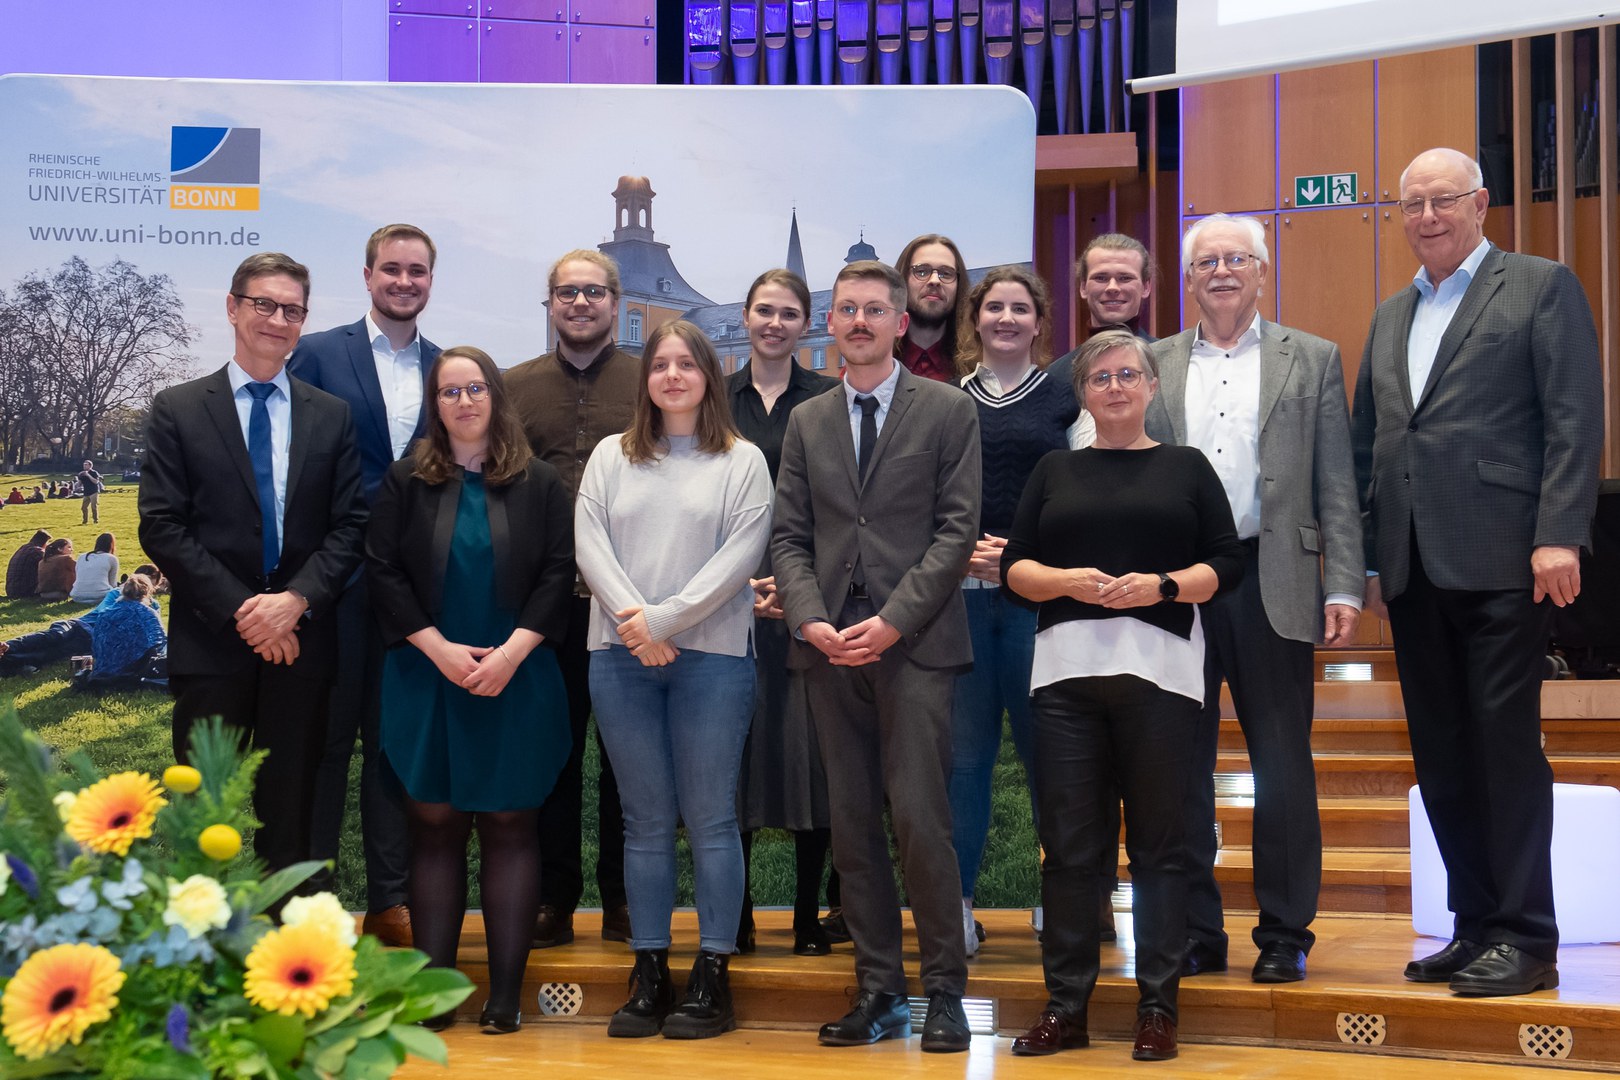 Outstanding doctoral theses and student engagement were rewarded at the traditional winter soirée organized by the Universitätsgesellschaft Bonn (UGB).